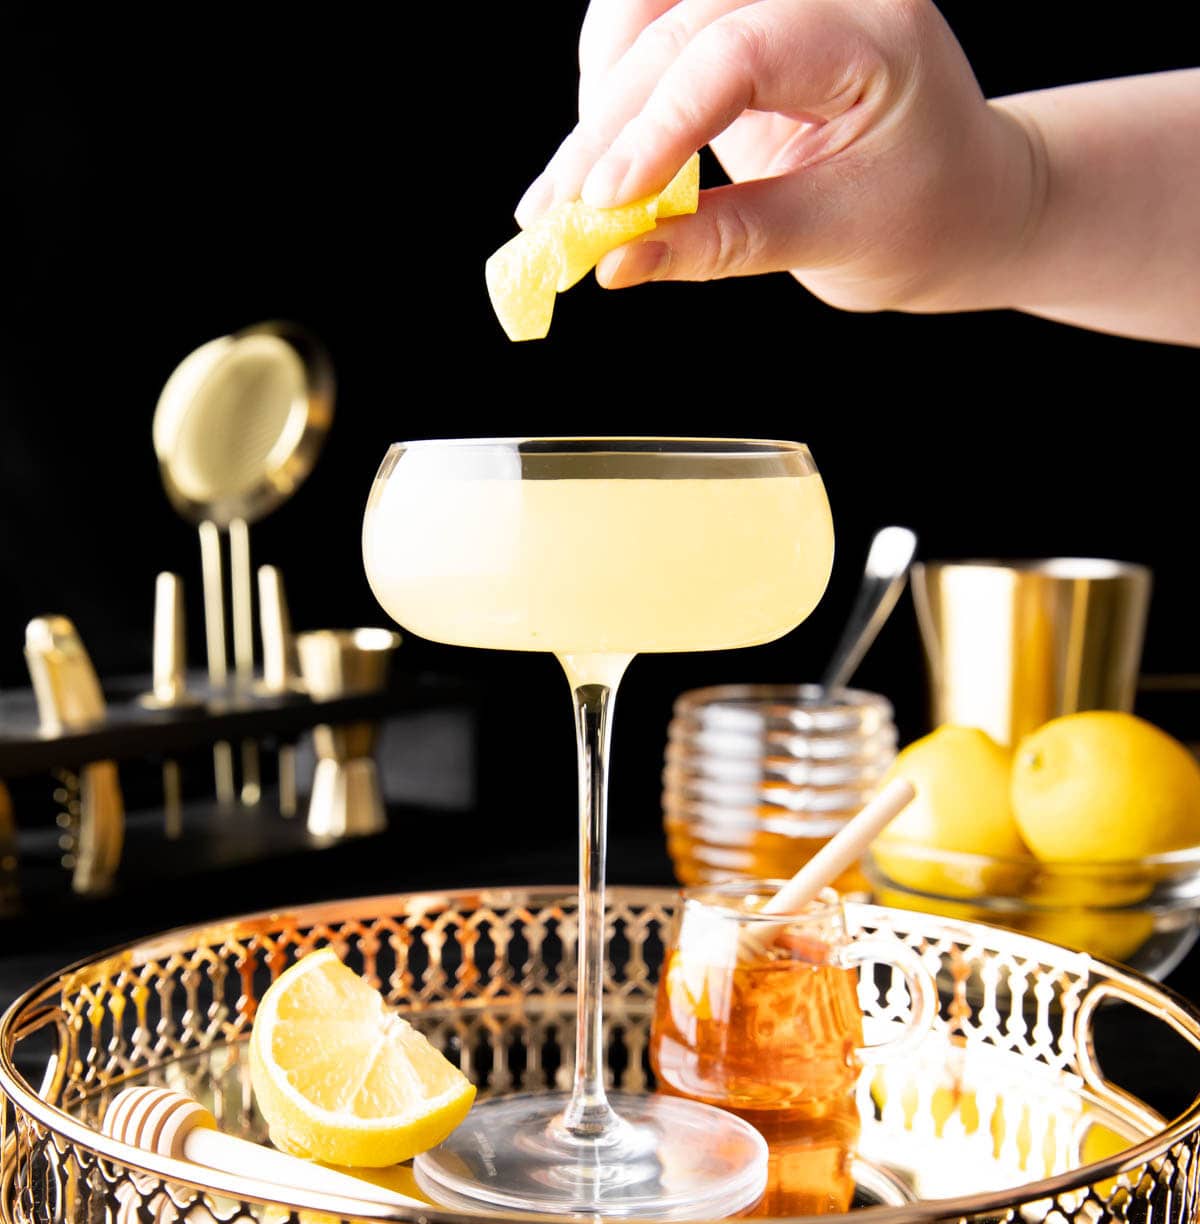 A photo showing How to make a Bee’s Knees Cocktail – expressing oil out of lemon garnish into glass